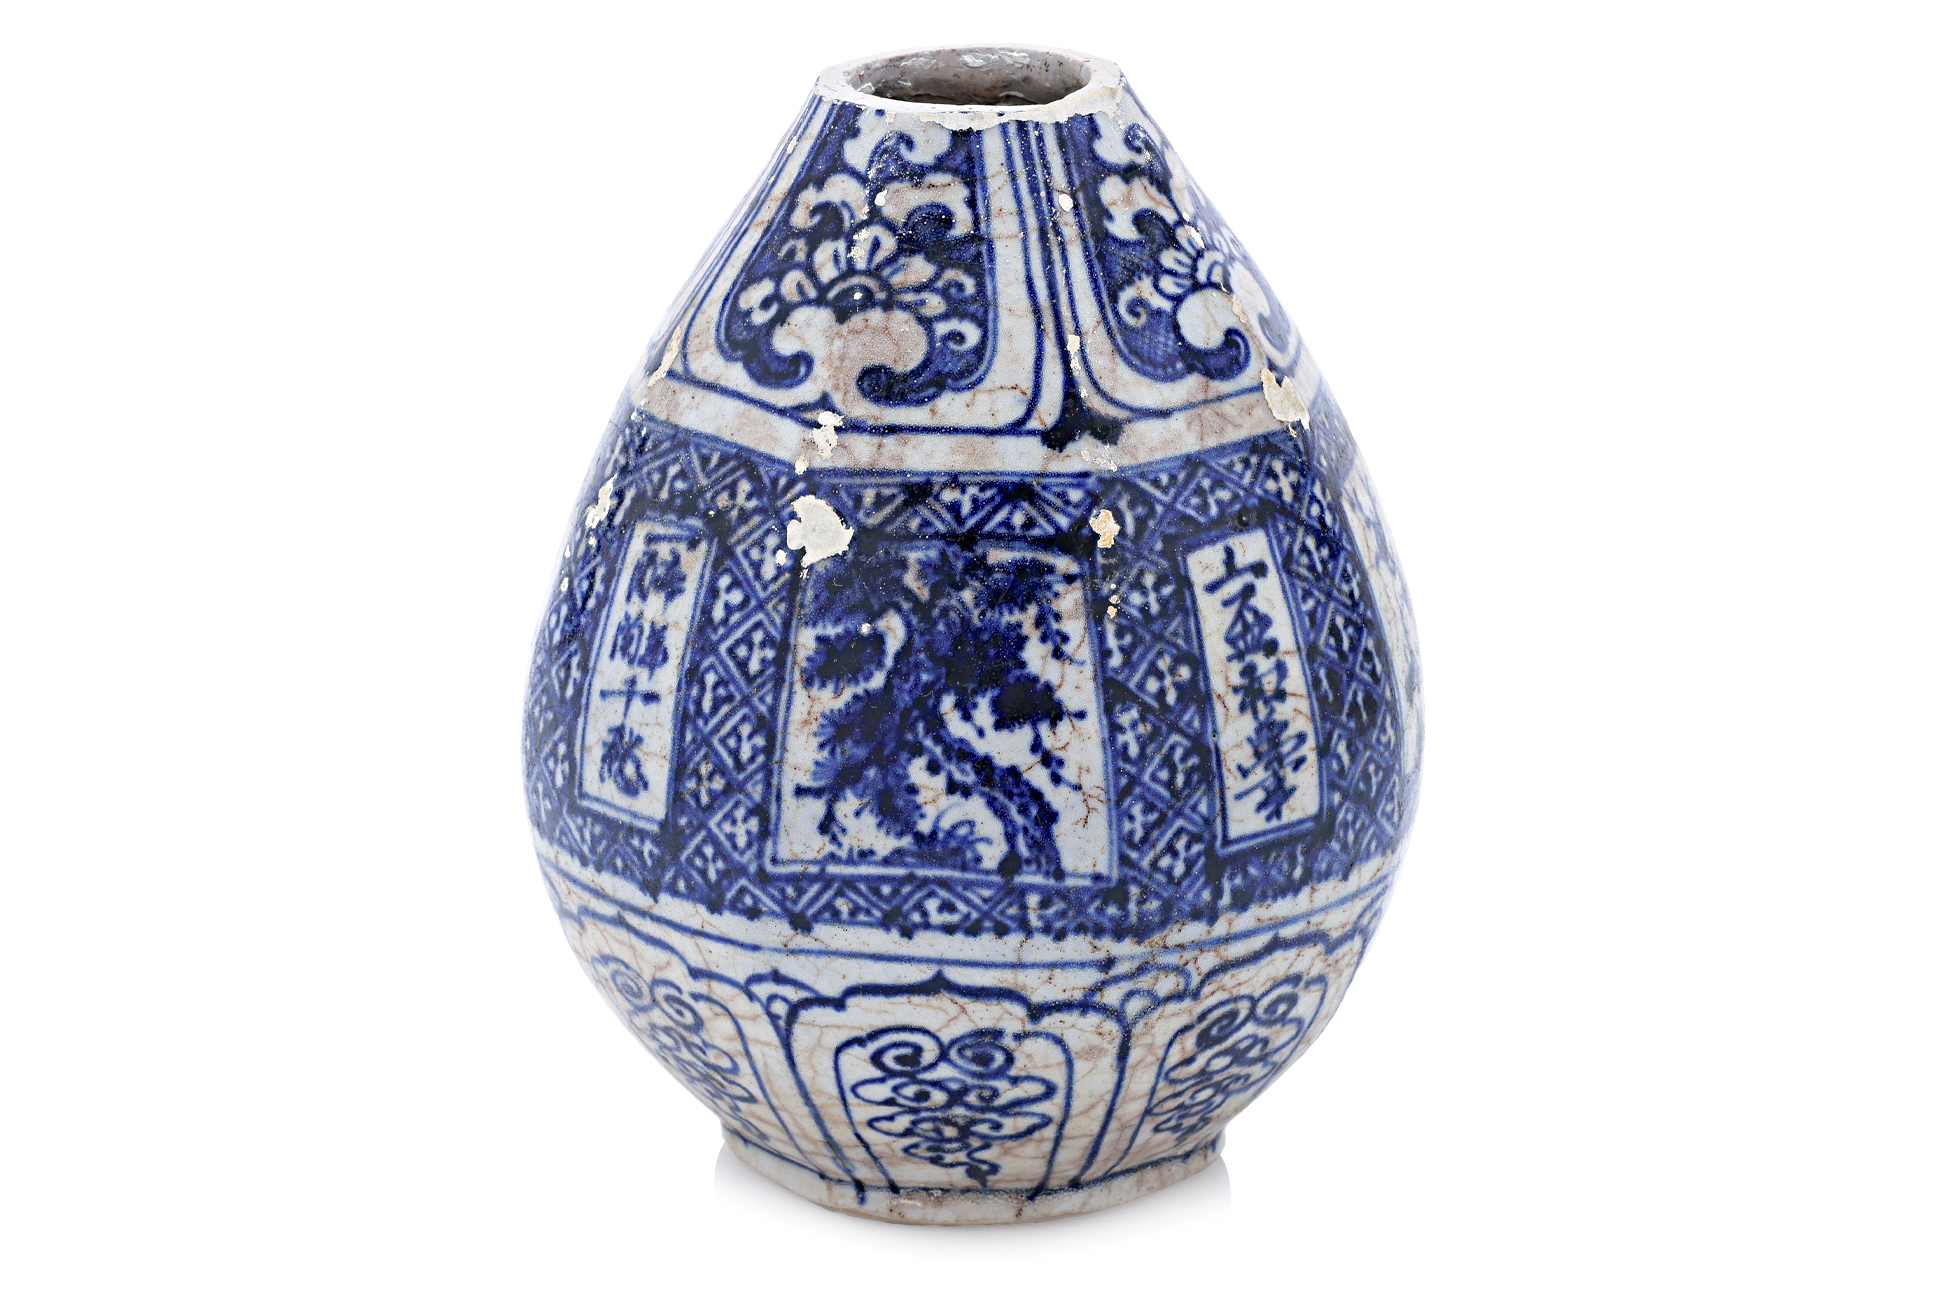 A VIETNAMESE BLUE AND WHITE PEAR SHAPED VASE